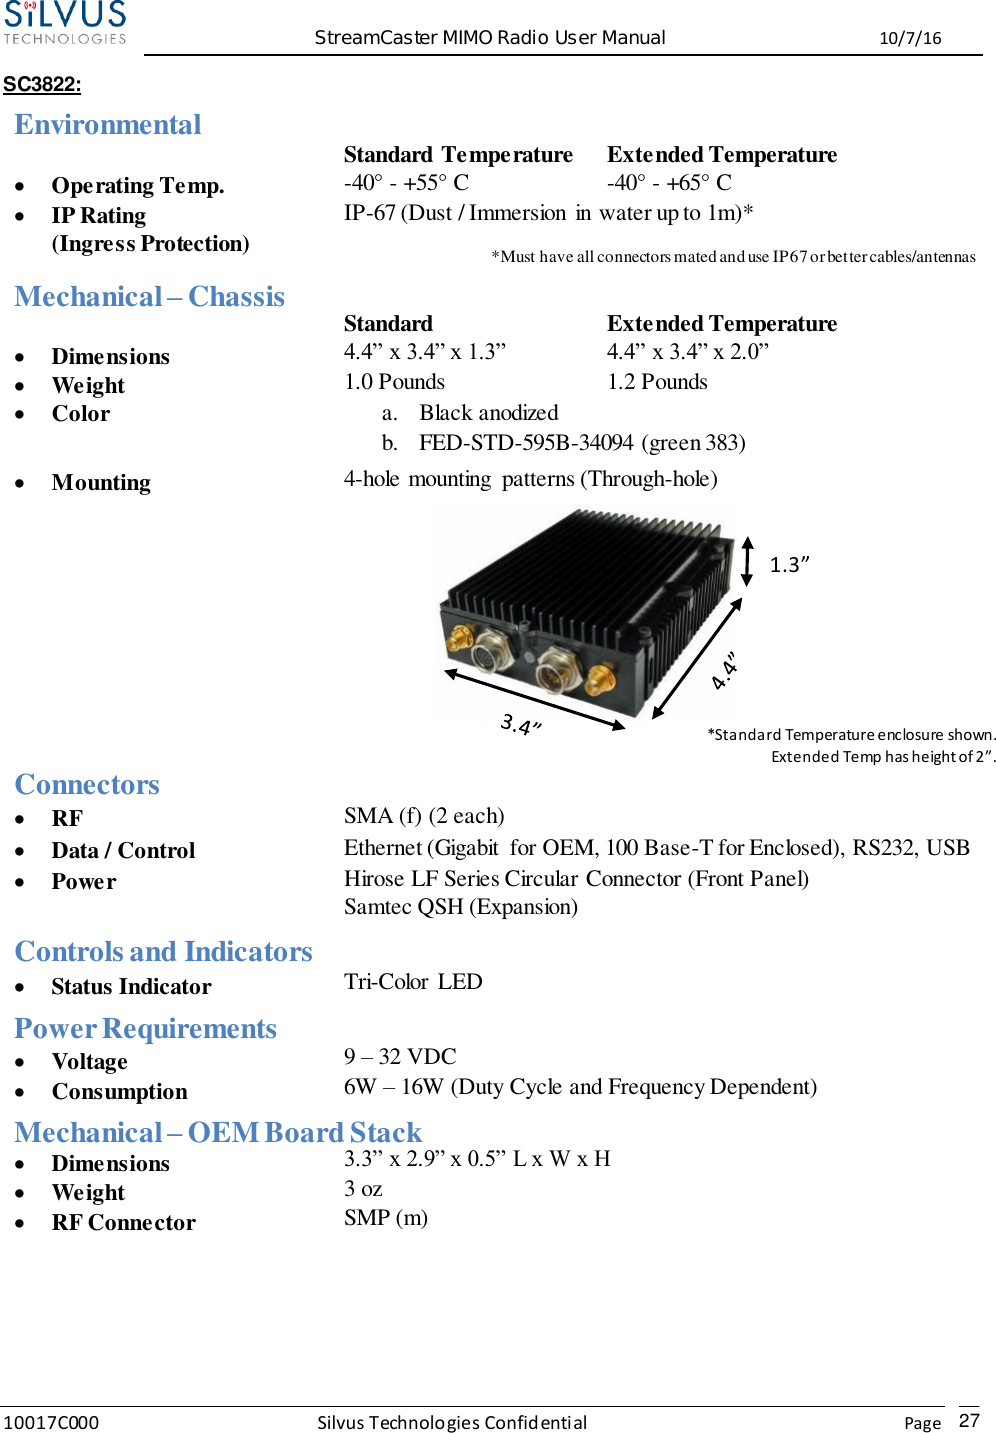  StreamCaster MIMO Radio User Manual  10/7/16 10017C000 Silvus Technologies Confidential    Page   27 SC3822: Environmental  Standard Temperature Extended Temperature  Operating Temp. -40° - +55° C -40° - +65° C  IP Rating (Ingress Protection) IP-67 (Dust / Immersion in water up to 1m)*   *Must have all connectors mated and use IP67 or better cables/antennas   Mechanical – Chassis  Standard Extended Temperature  Dimensions 4.4” x 3.4” x 1.3” 4.4” x 3.4” x 2.0”  Weight 1.0 Pounds 1.2 Pounds  Color a. Black anodized b. FED-STD-595B-34094 (green 383)  Mounting 4-hole mounting  patterns (Through-hole)       Connectors  RF SMA (f) (2 each)  Data / Control Ethernet (Gigabit  for OEM, 100 Base-T for Enclosed), RS232, USB  Power Hirose LF Series Circular Connector (Front Panel) Samtec QSH (Expansion) Controls and Indicators  Status Indicator Tri-Color  LED Power Requirements  Voltage 9 – 32 VDC  Consumption 6W – 16W (Duty Cycle and Frequency Dependent) 24.5 W – 80% Tx Duty Cycle Mechanical – OEM Board Stack  Dimensions 3.3” x 2.9” x 0.5” L x W x H  Weight 3 oz  RF Connector SMP (m)    *Standard Temperature enclosure shown. Extended Temp has height of 2”. 1.3” Inch 